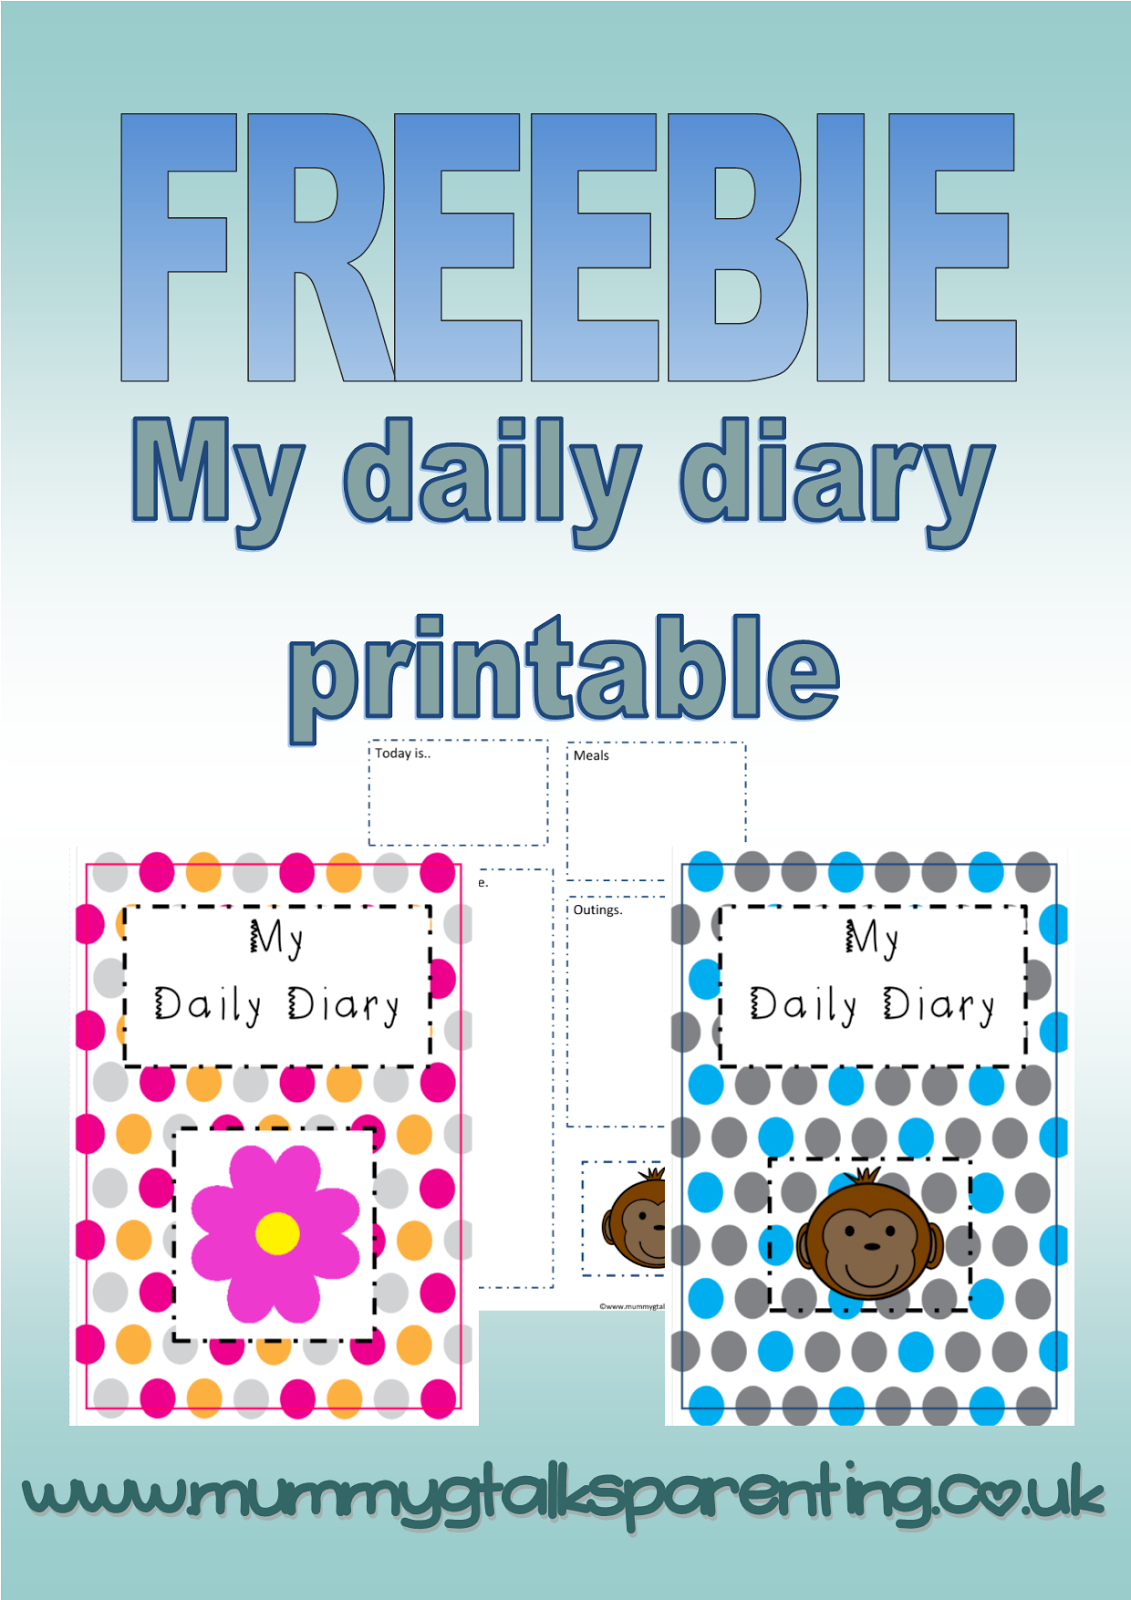 Freebie 'my Daily Diary' Printable For Childminders And Nurseries - Free Printable Childminding Resources